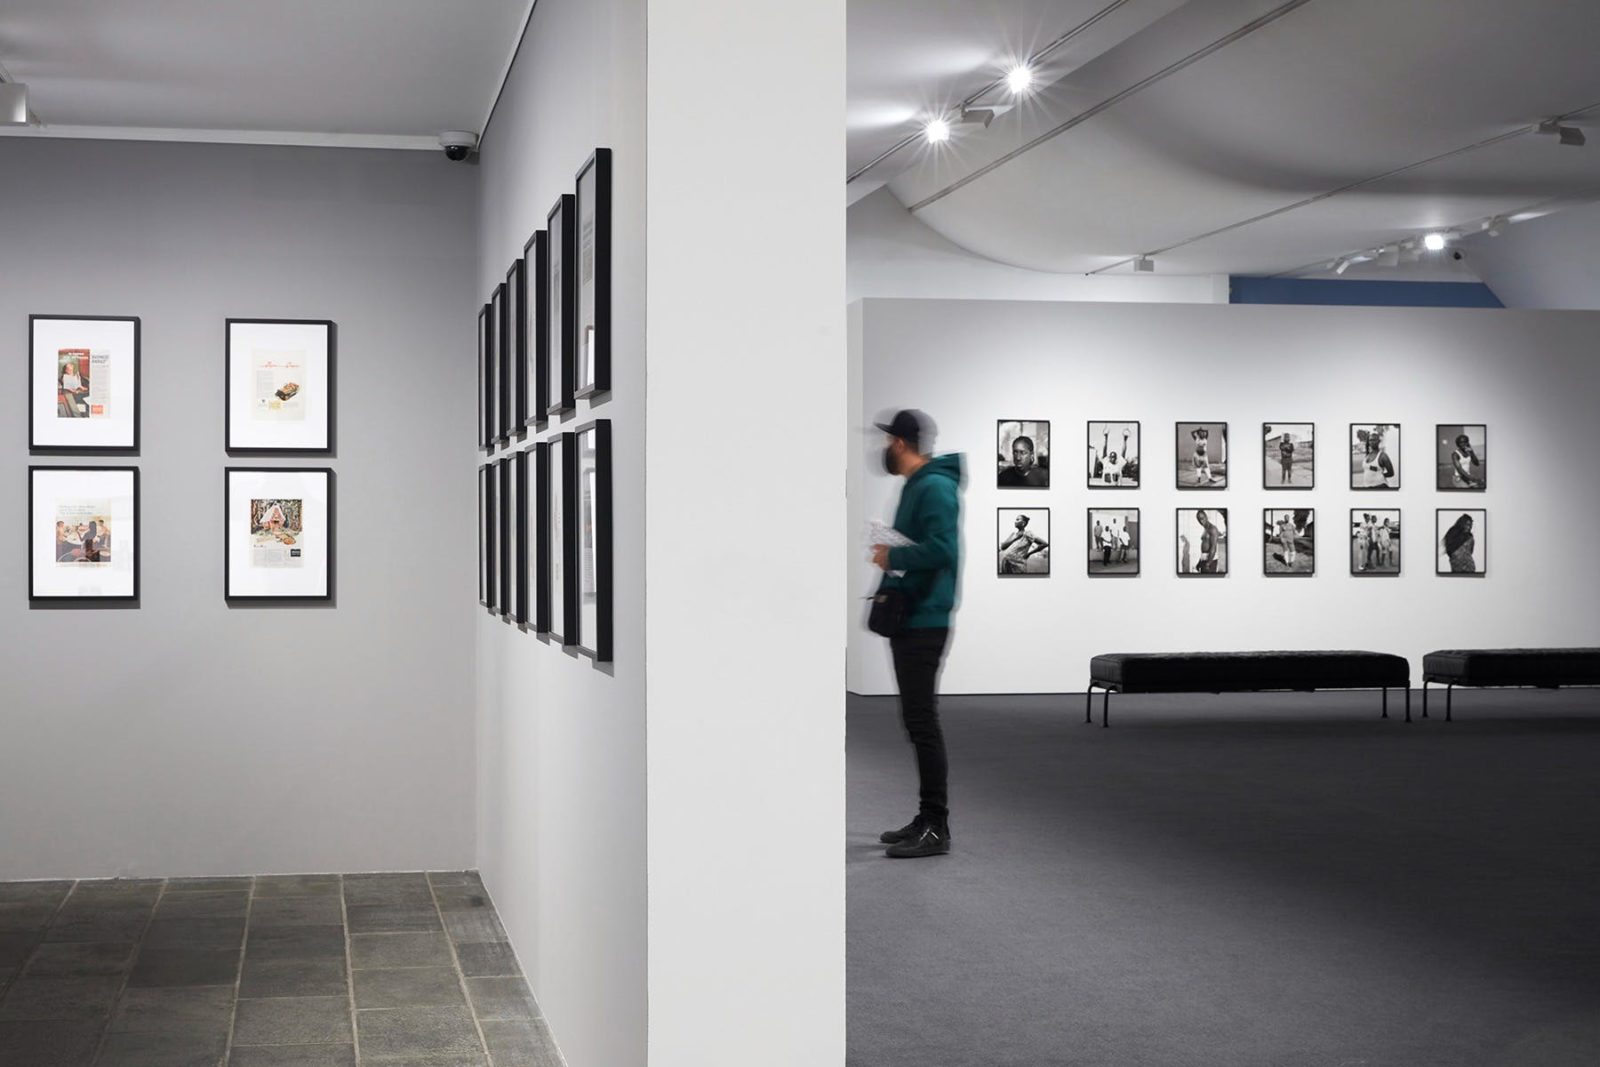 A man looks at photographs on display in the Gallery